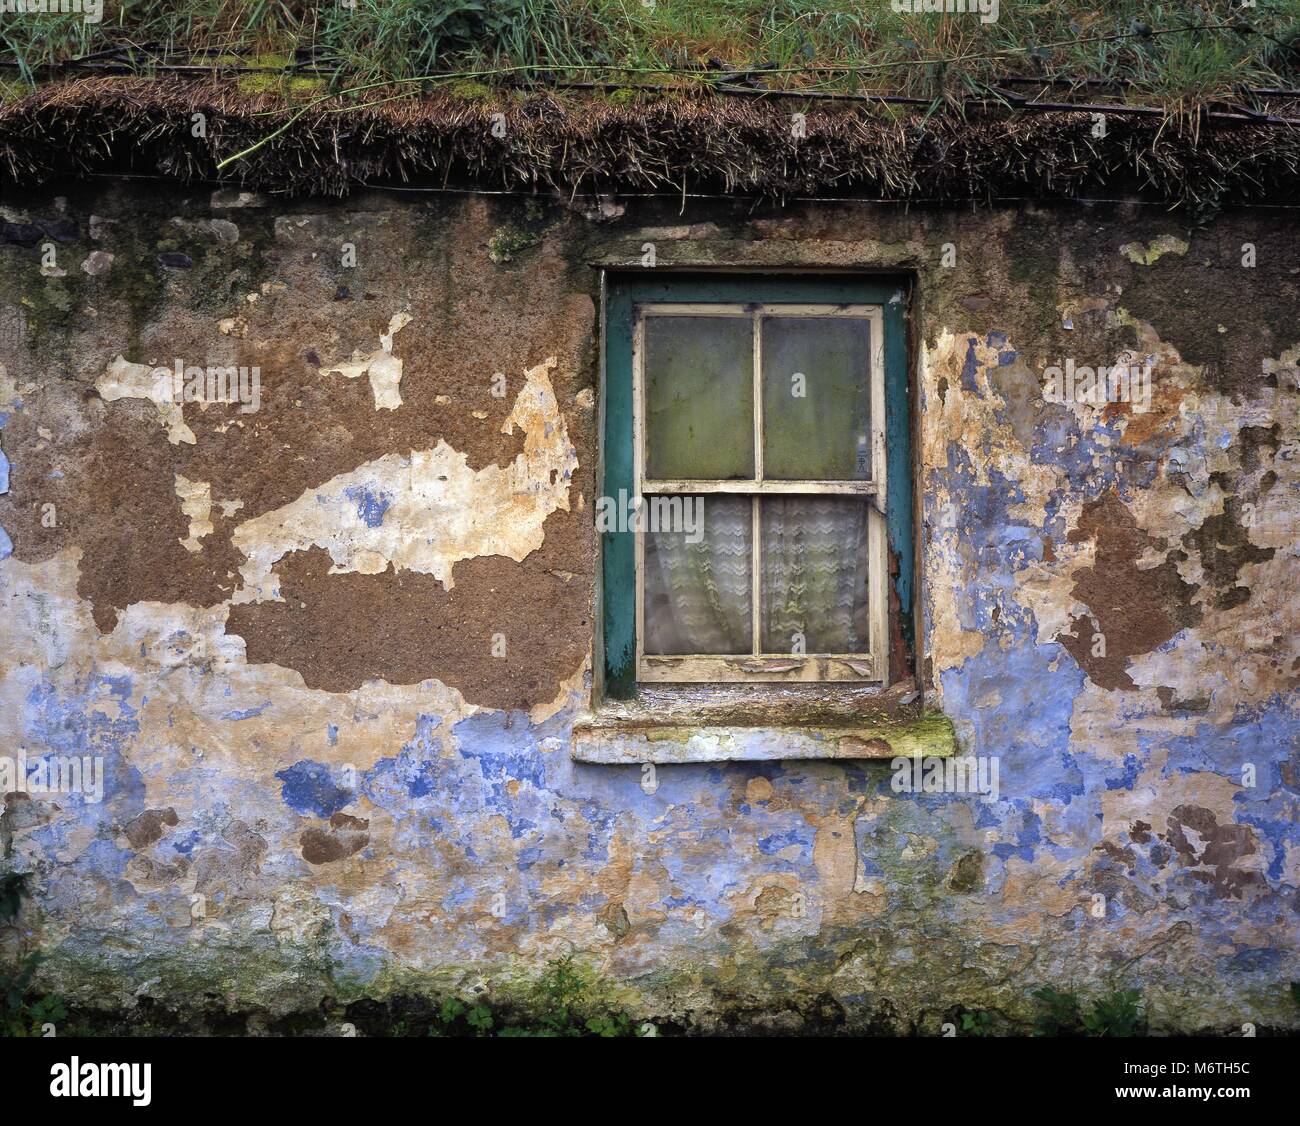 A decaying wall, window and grass roof of a rundown house in rural Ireland. Stock Photo